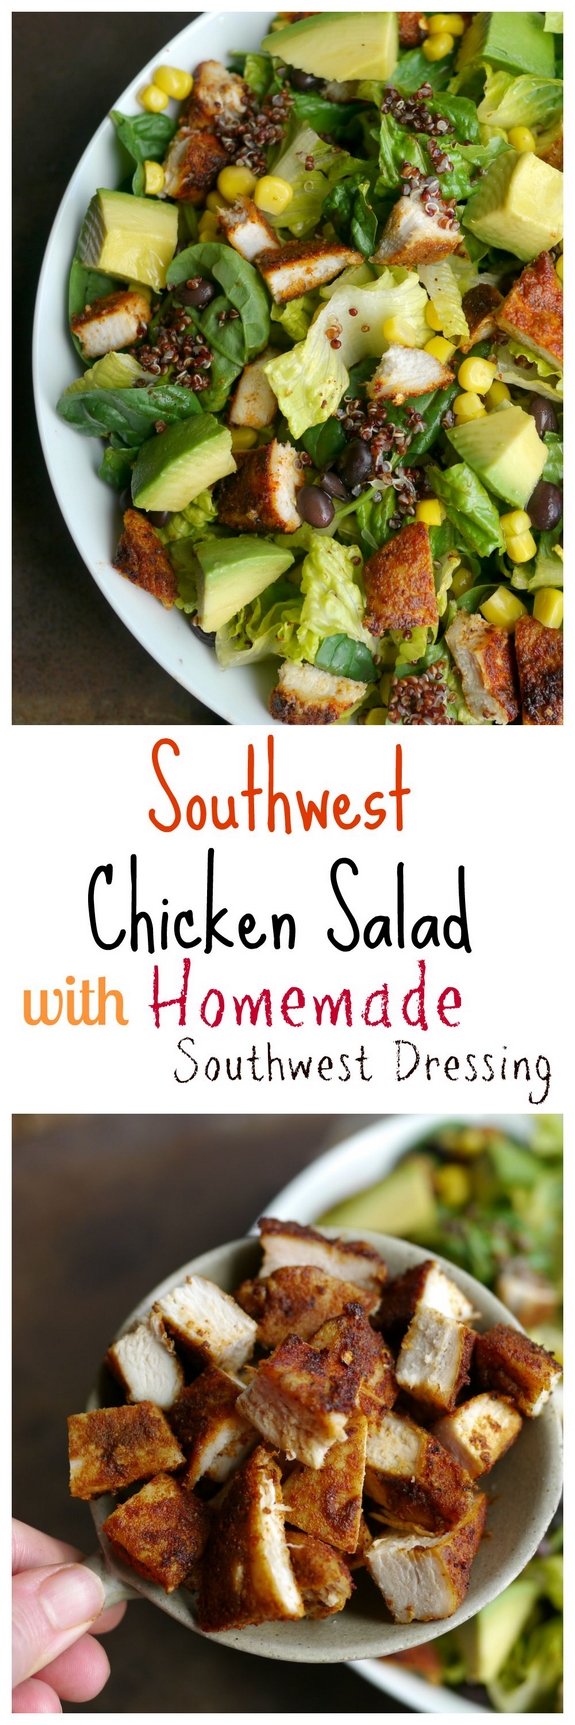 Southwest Chicken Salad with Homemade Southwest Dressing so delicious